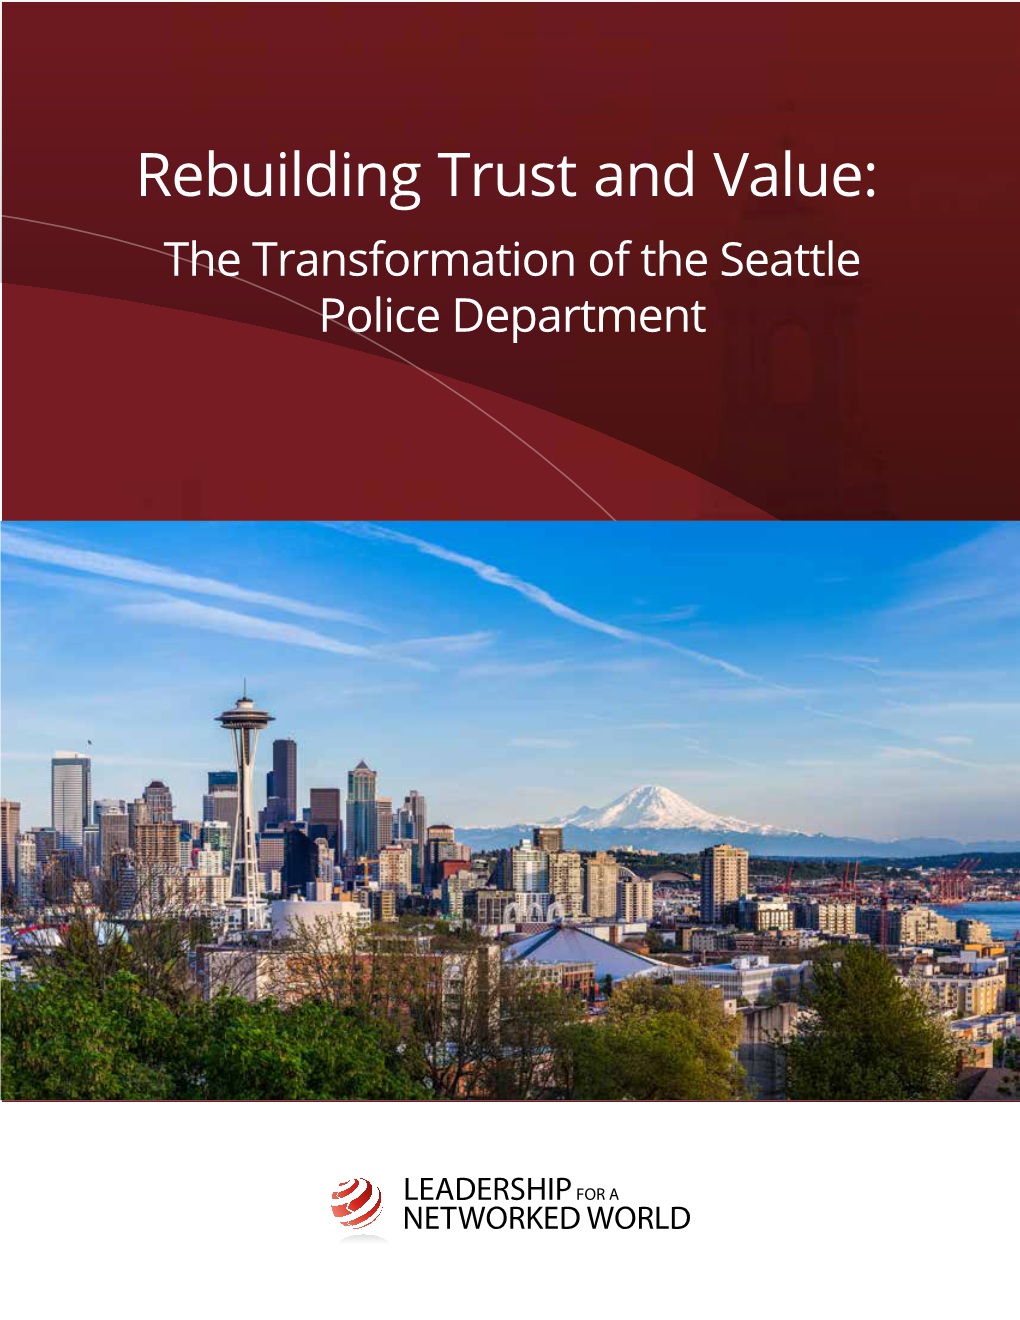 Rebuilding Trust and Value: the Transformation of the Seattle Police Department Contents